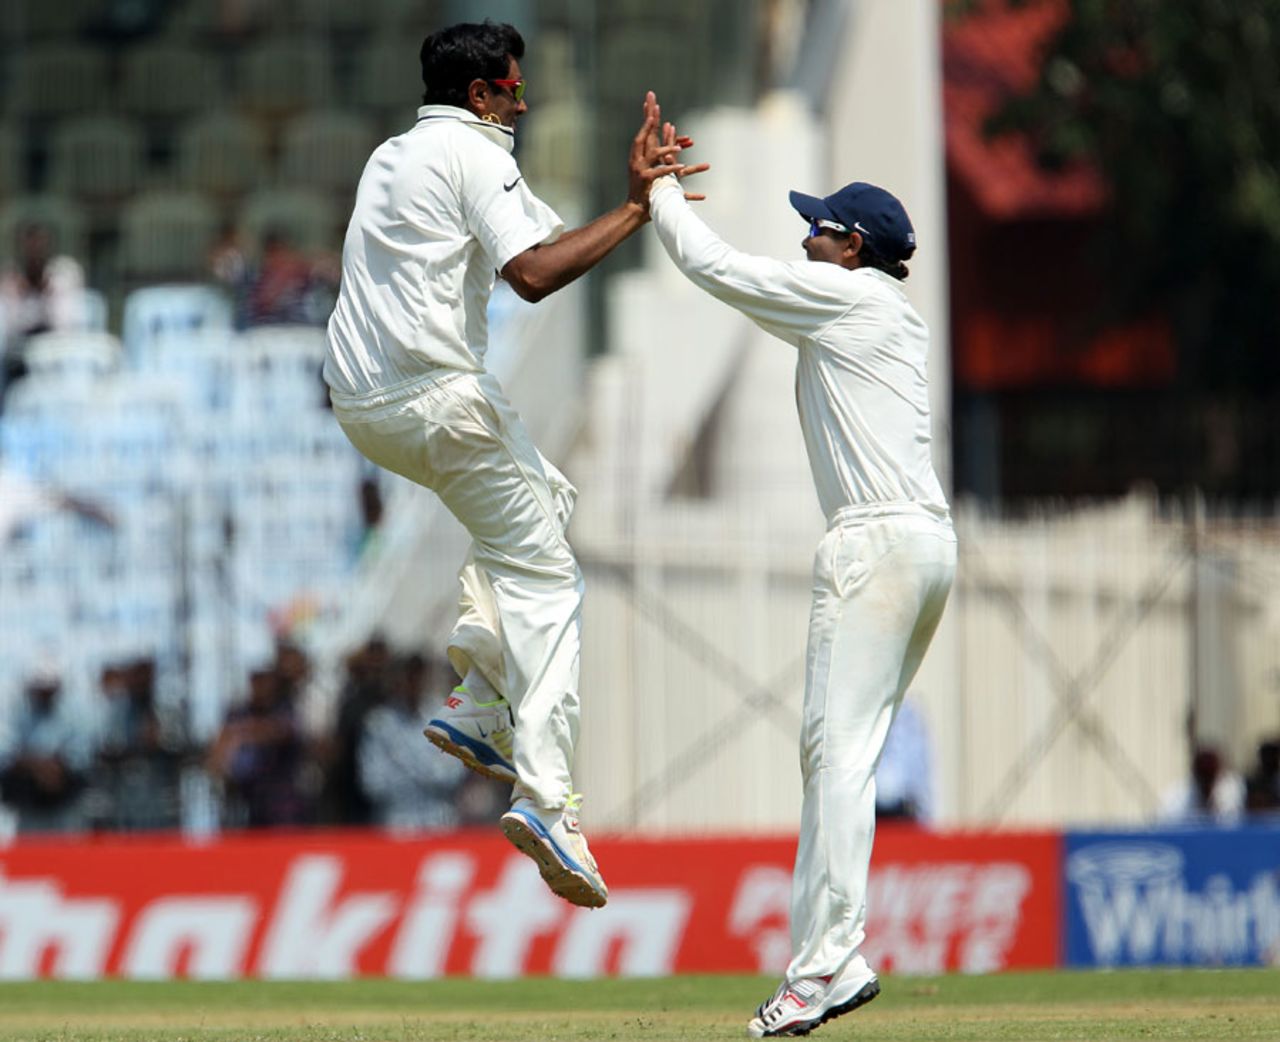 R Ashwin is pumped up after dismissing Shane Watson, India v Australia, 1st Test, Chennai, 1st day, February 22, 2013